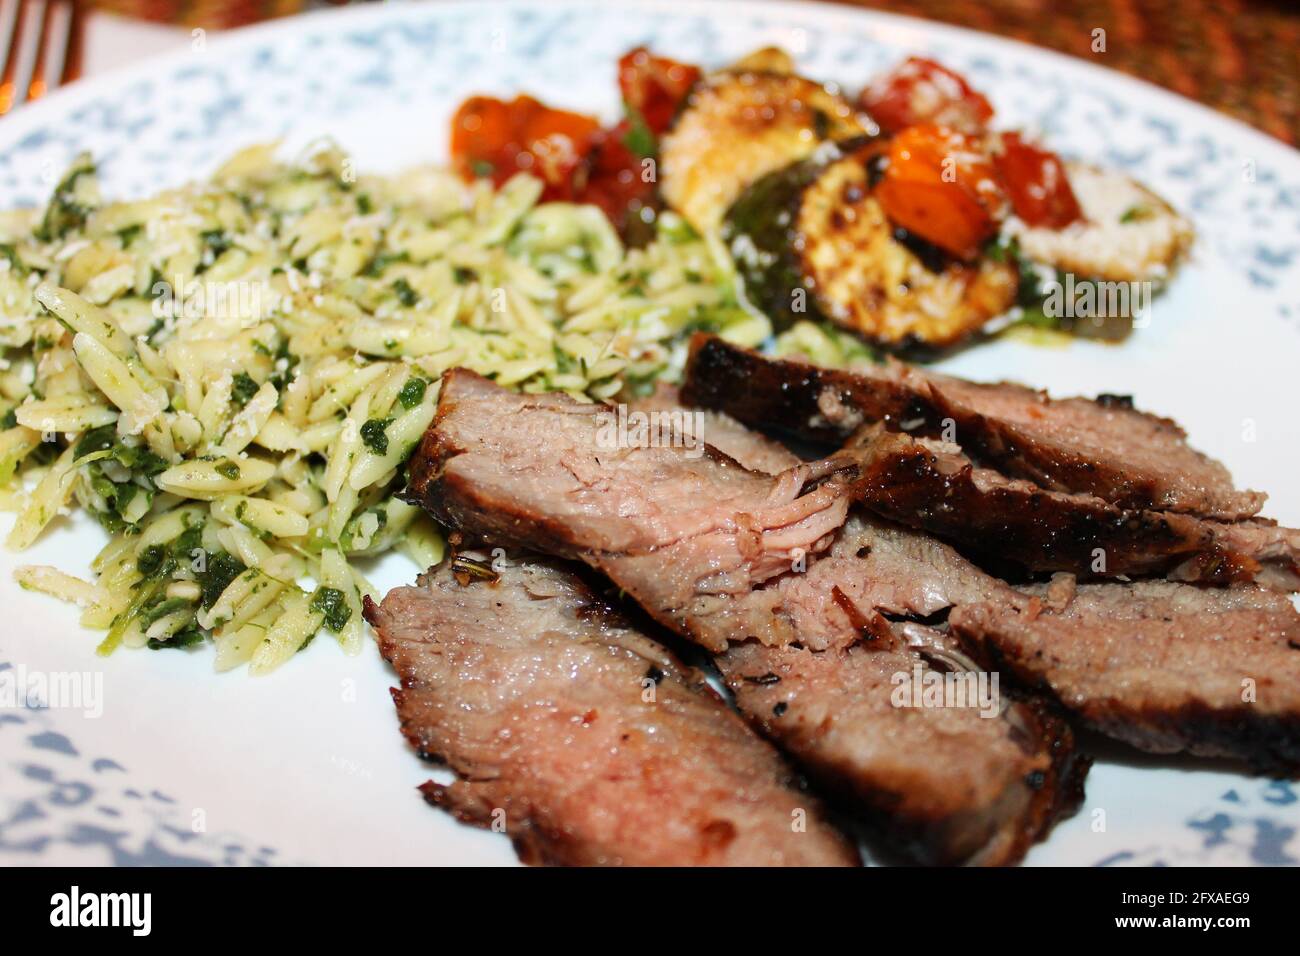 Close-up of a serving of Tuscan Steak with orzo, fried zucchini and cherry tomatoes. Stock Photo